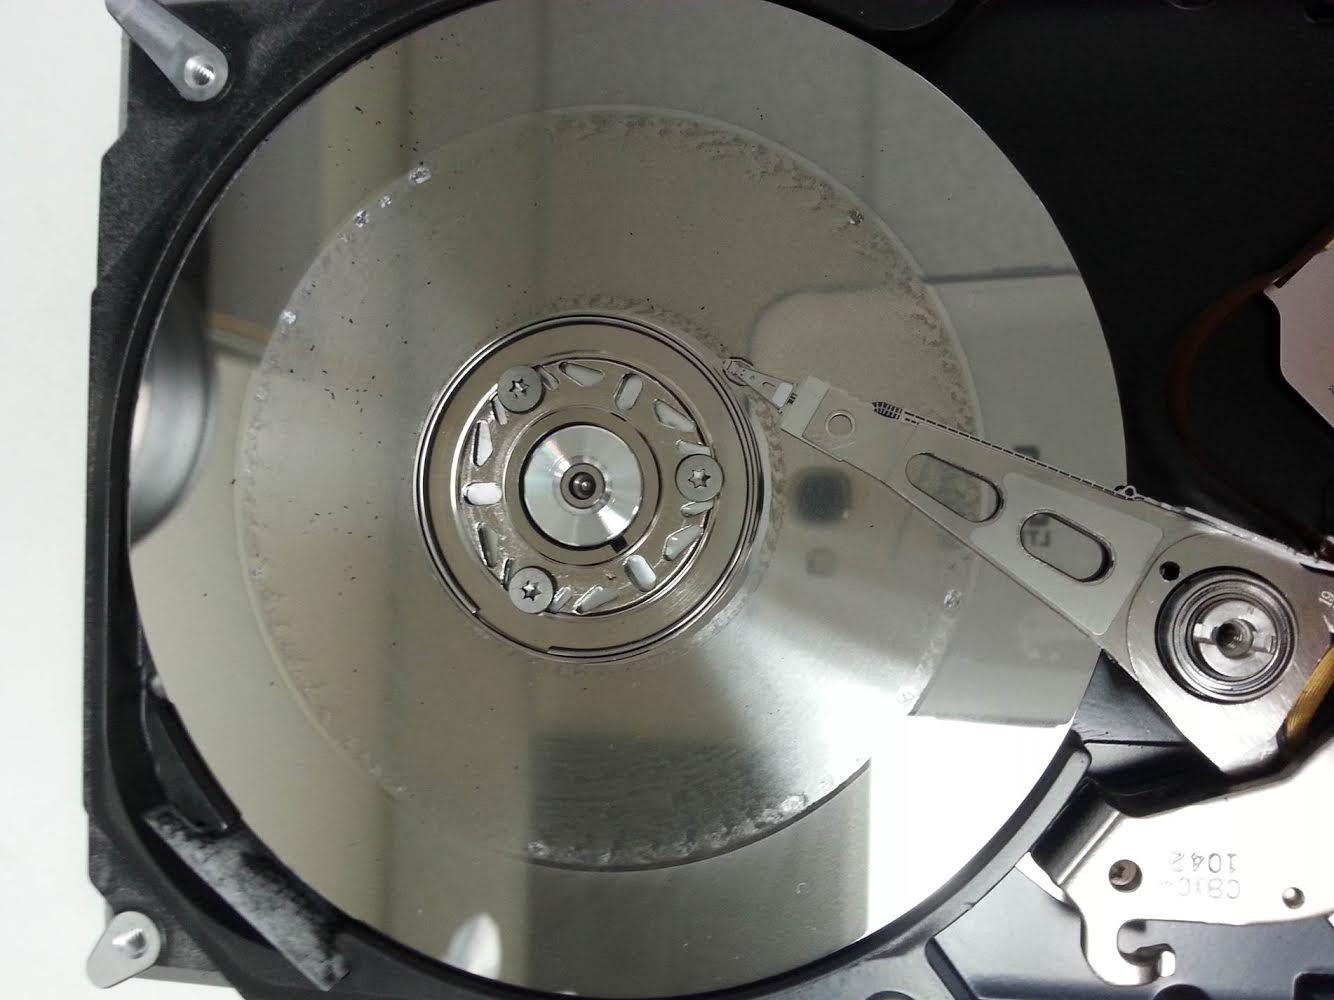 what can damage hard drive